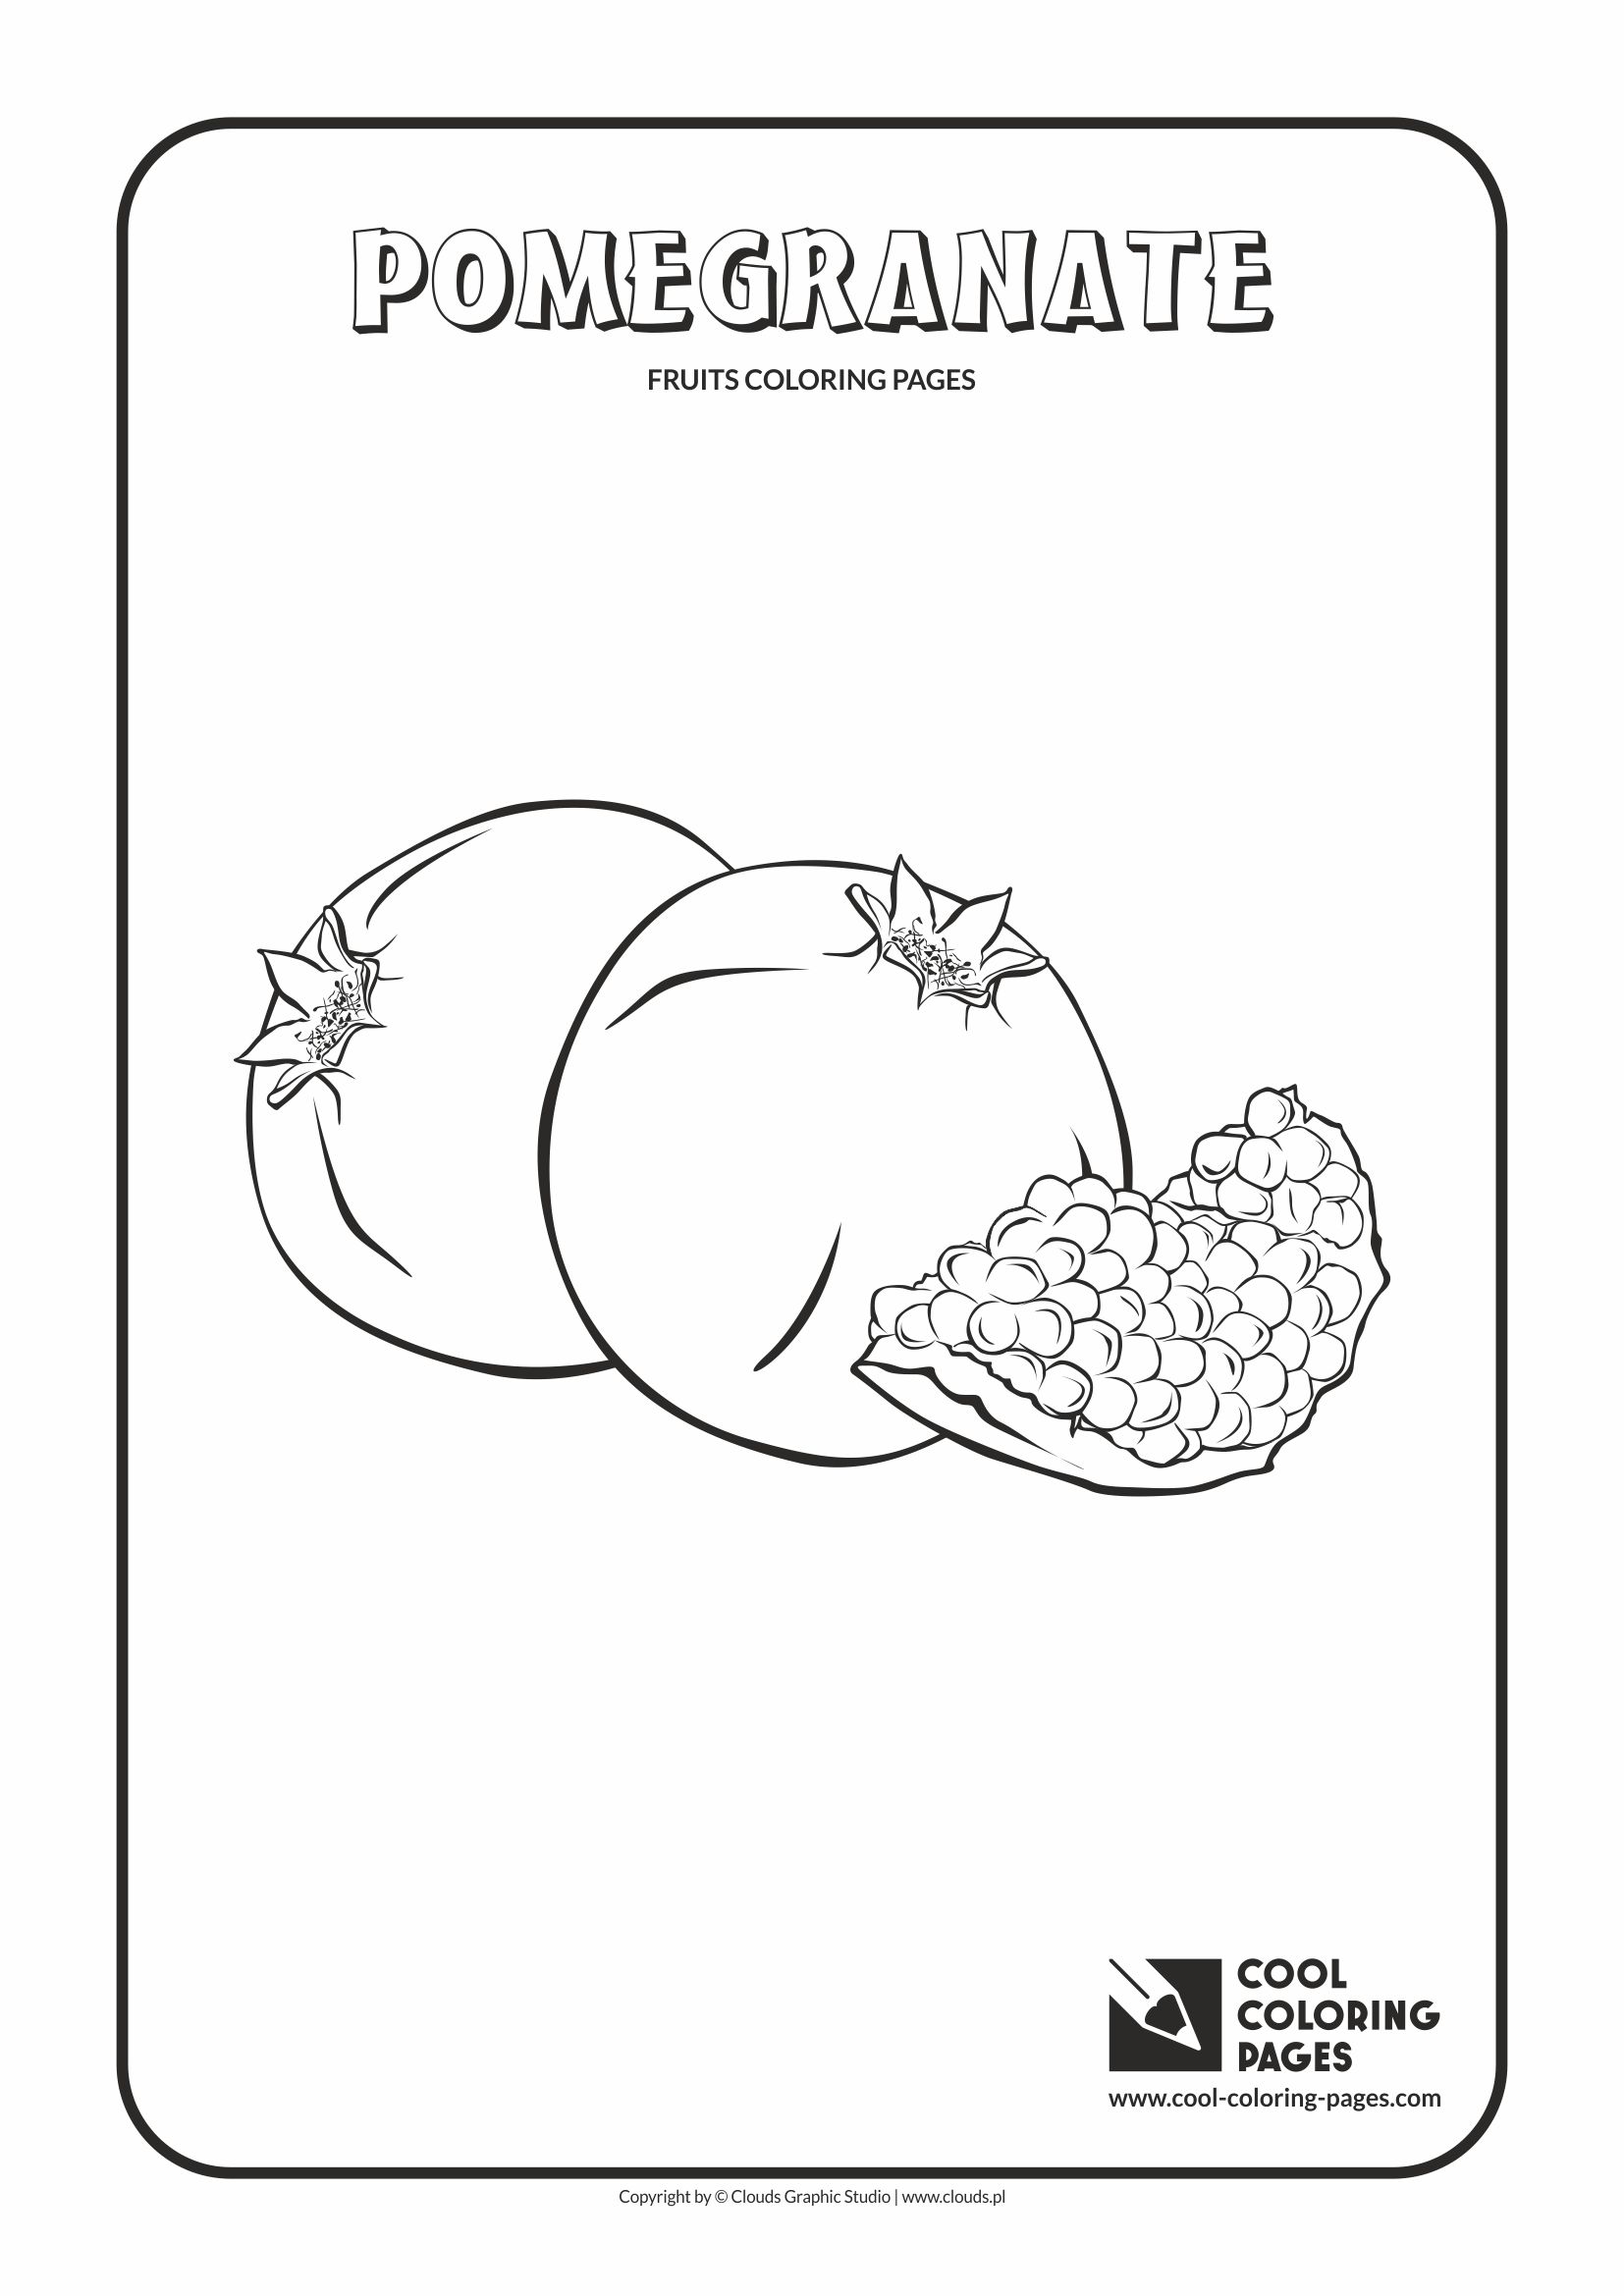 Cool Coloring Pages - Plants / Pomegranate / Coloring page with pomegranate